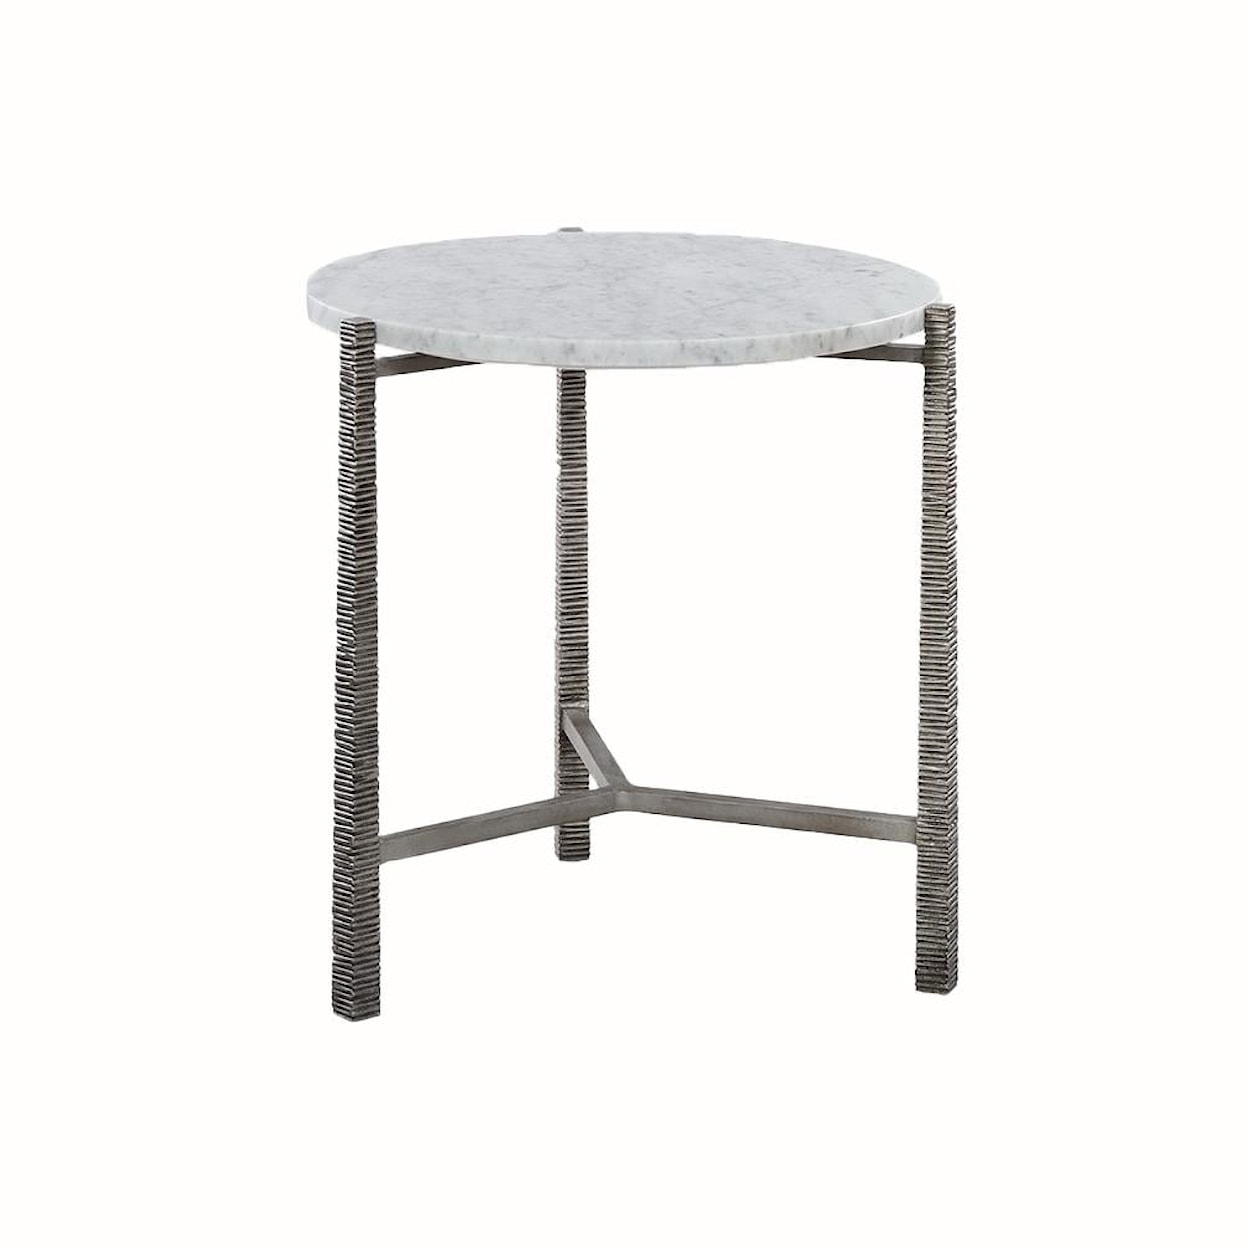 Oliver Home Furnishings End/ Side Tables ROUND MARBLE TOP SPOT TABLE